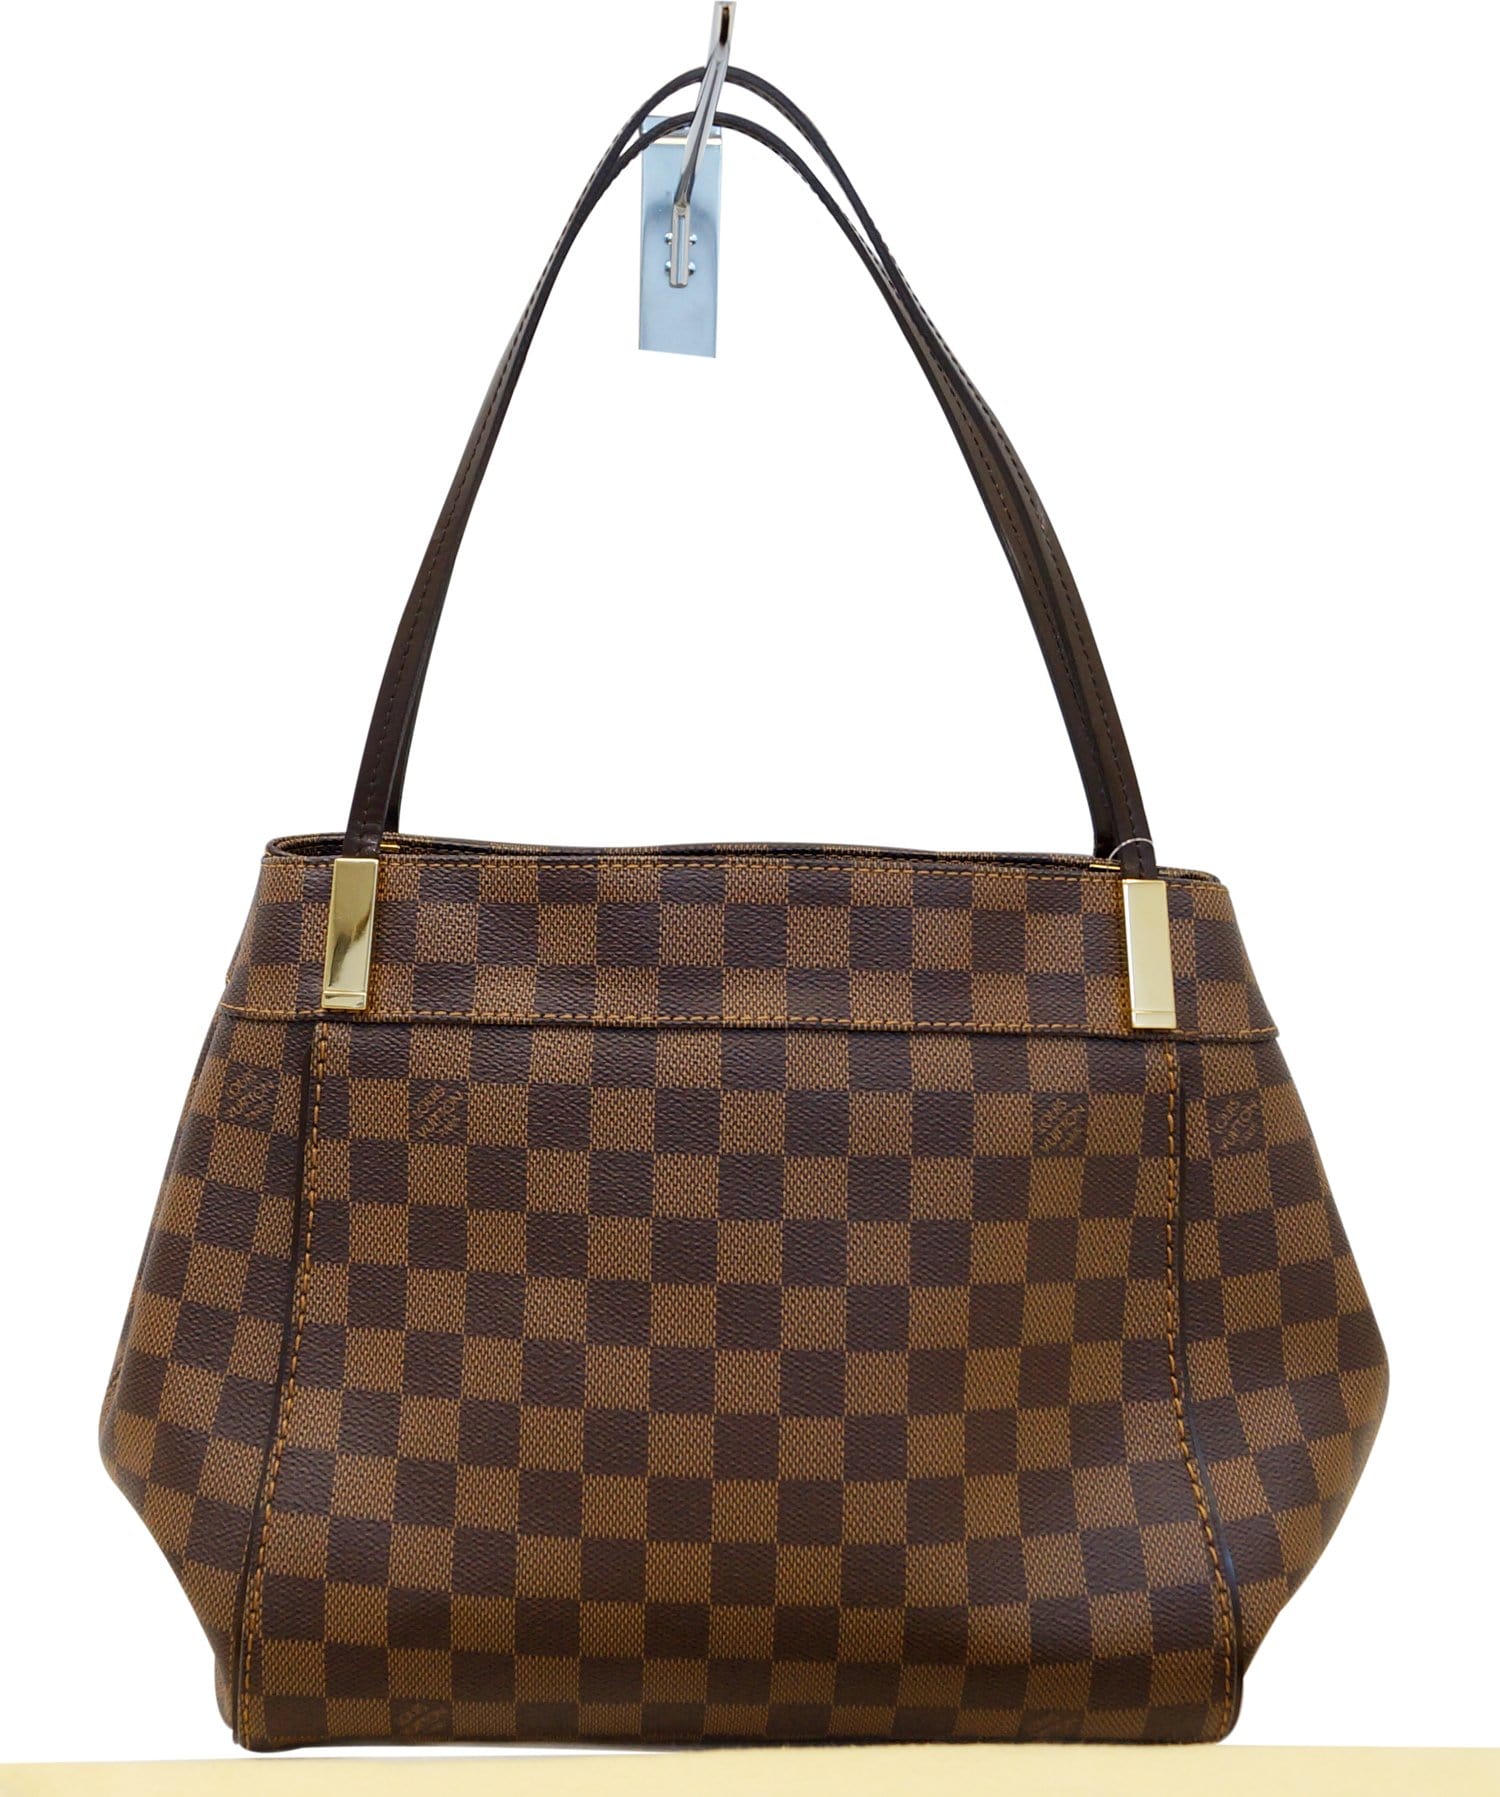 Alcantara-lining- Louis Vuitton and Tom Ford bags uses this kind of linning